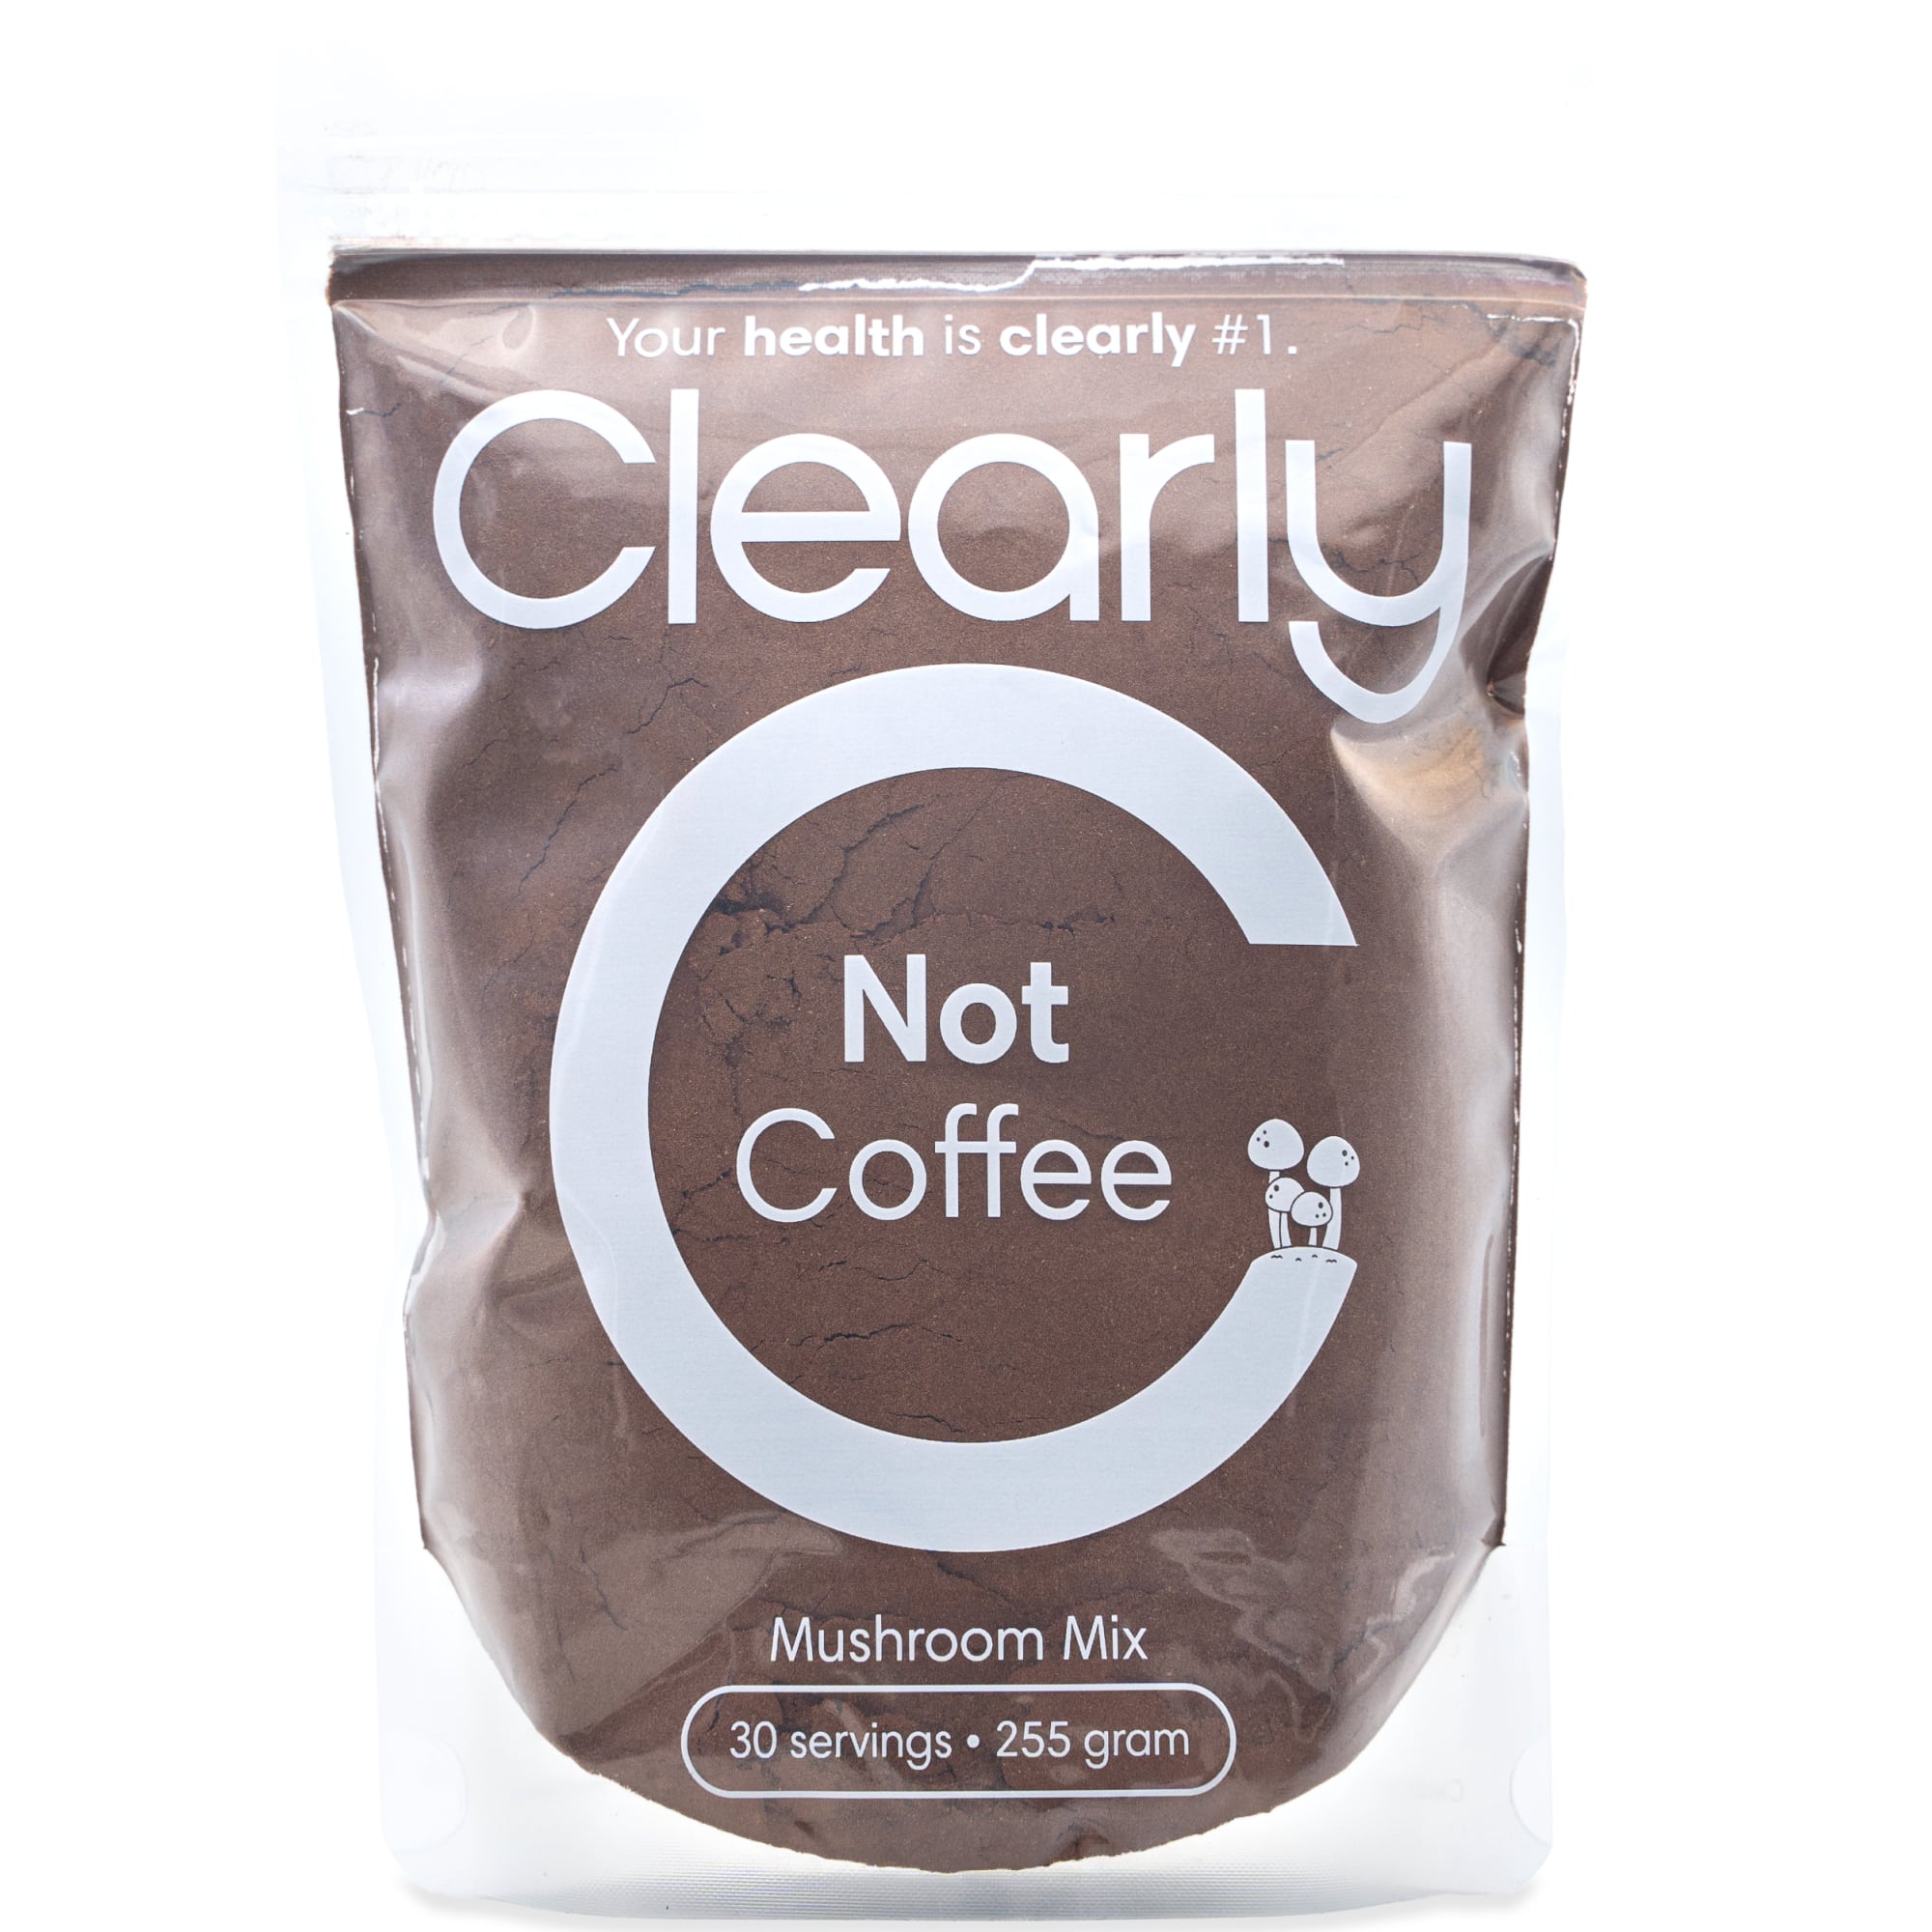 Clearly: Free Product